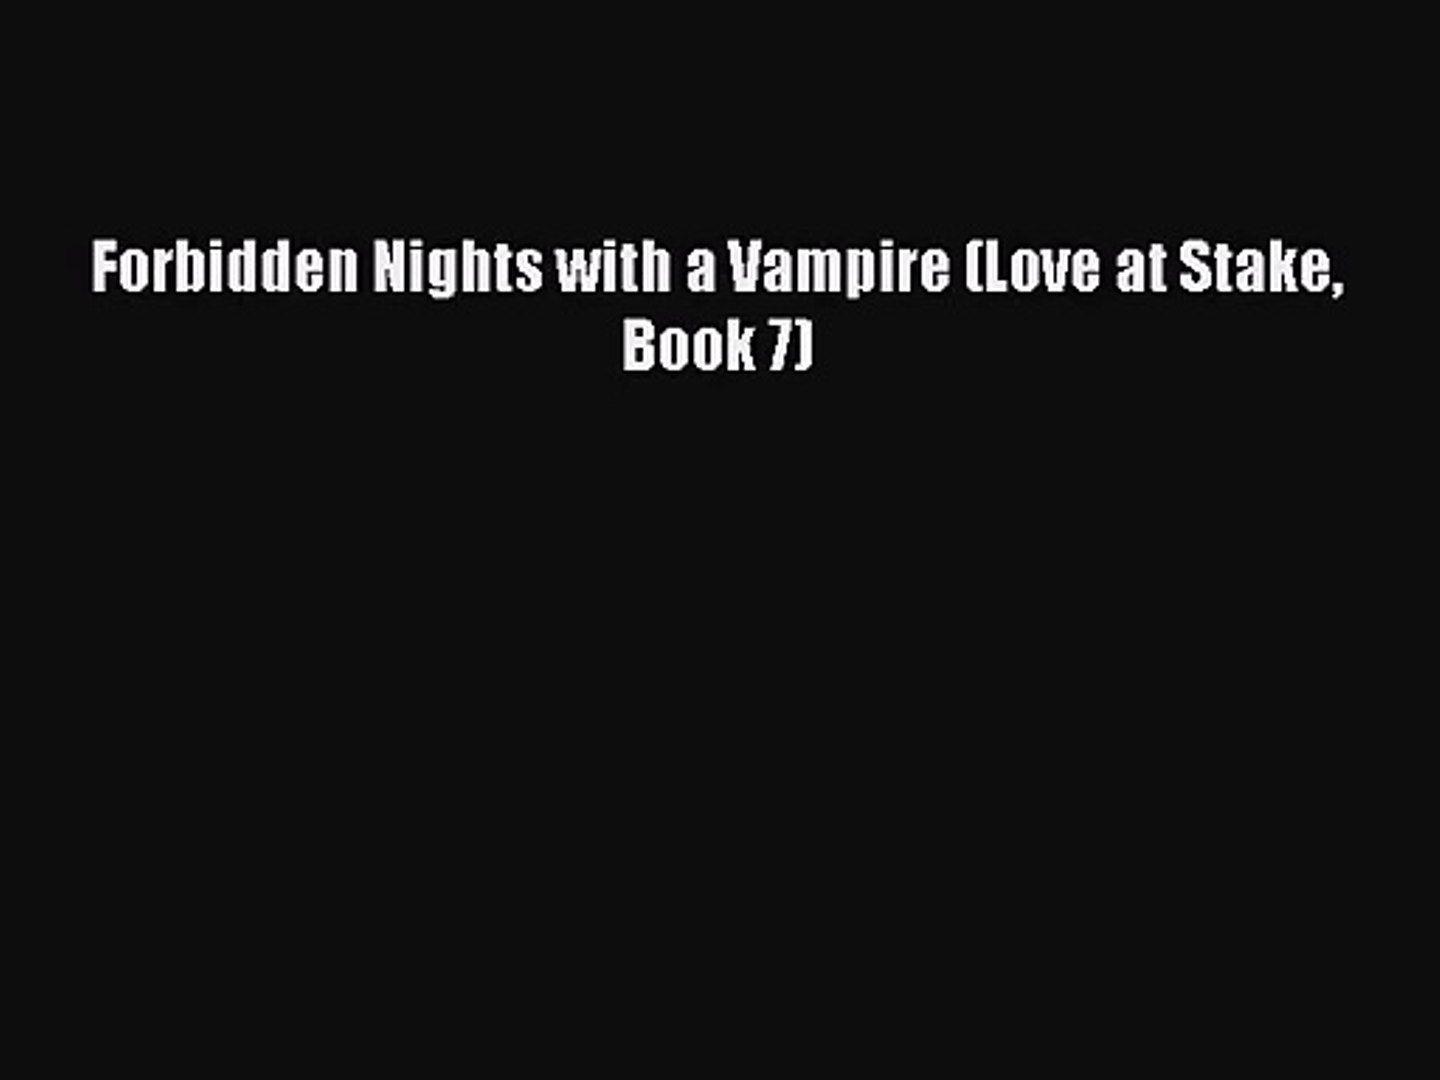 Vampire Love Logo - PDF Download Forbidden Nights with a Vampire Love at Stake Book 7